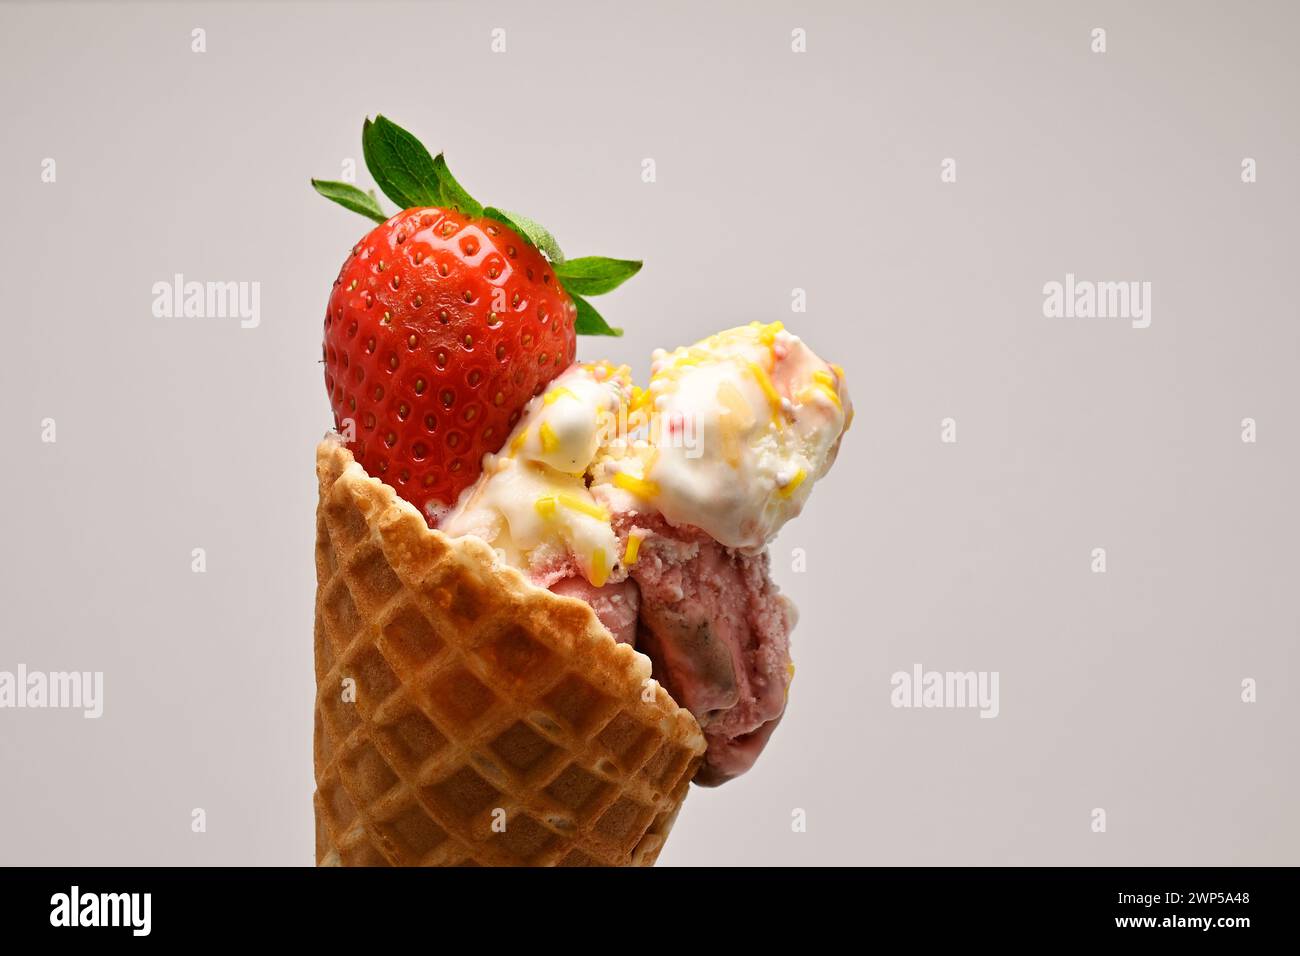 Delicious vanilla and berry ice cream scoops in a waffle cone topped with a fresh strawberry and mint leaf against a white background Stock Photo